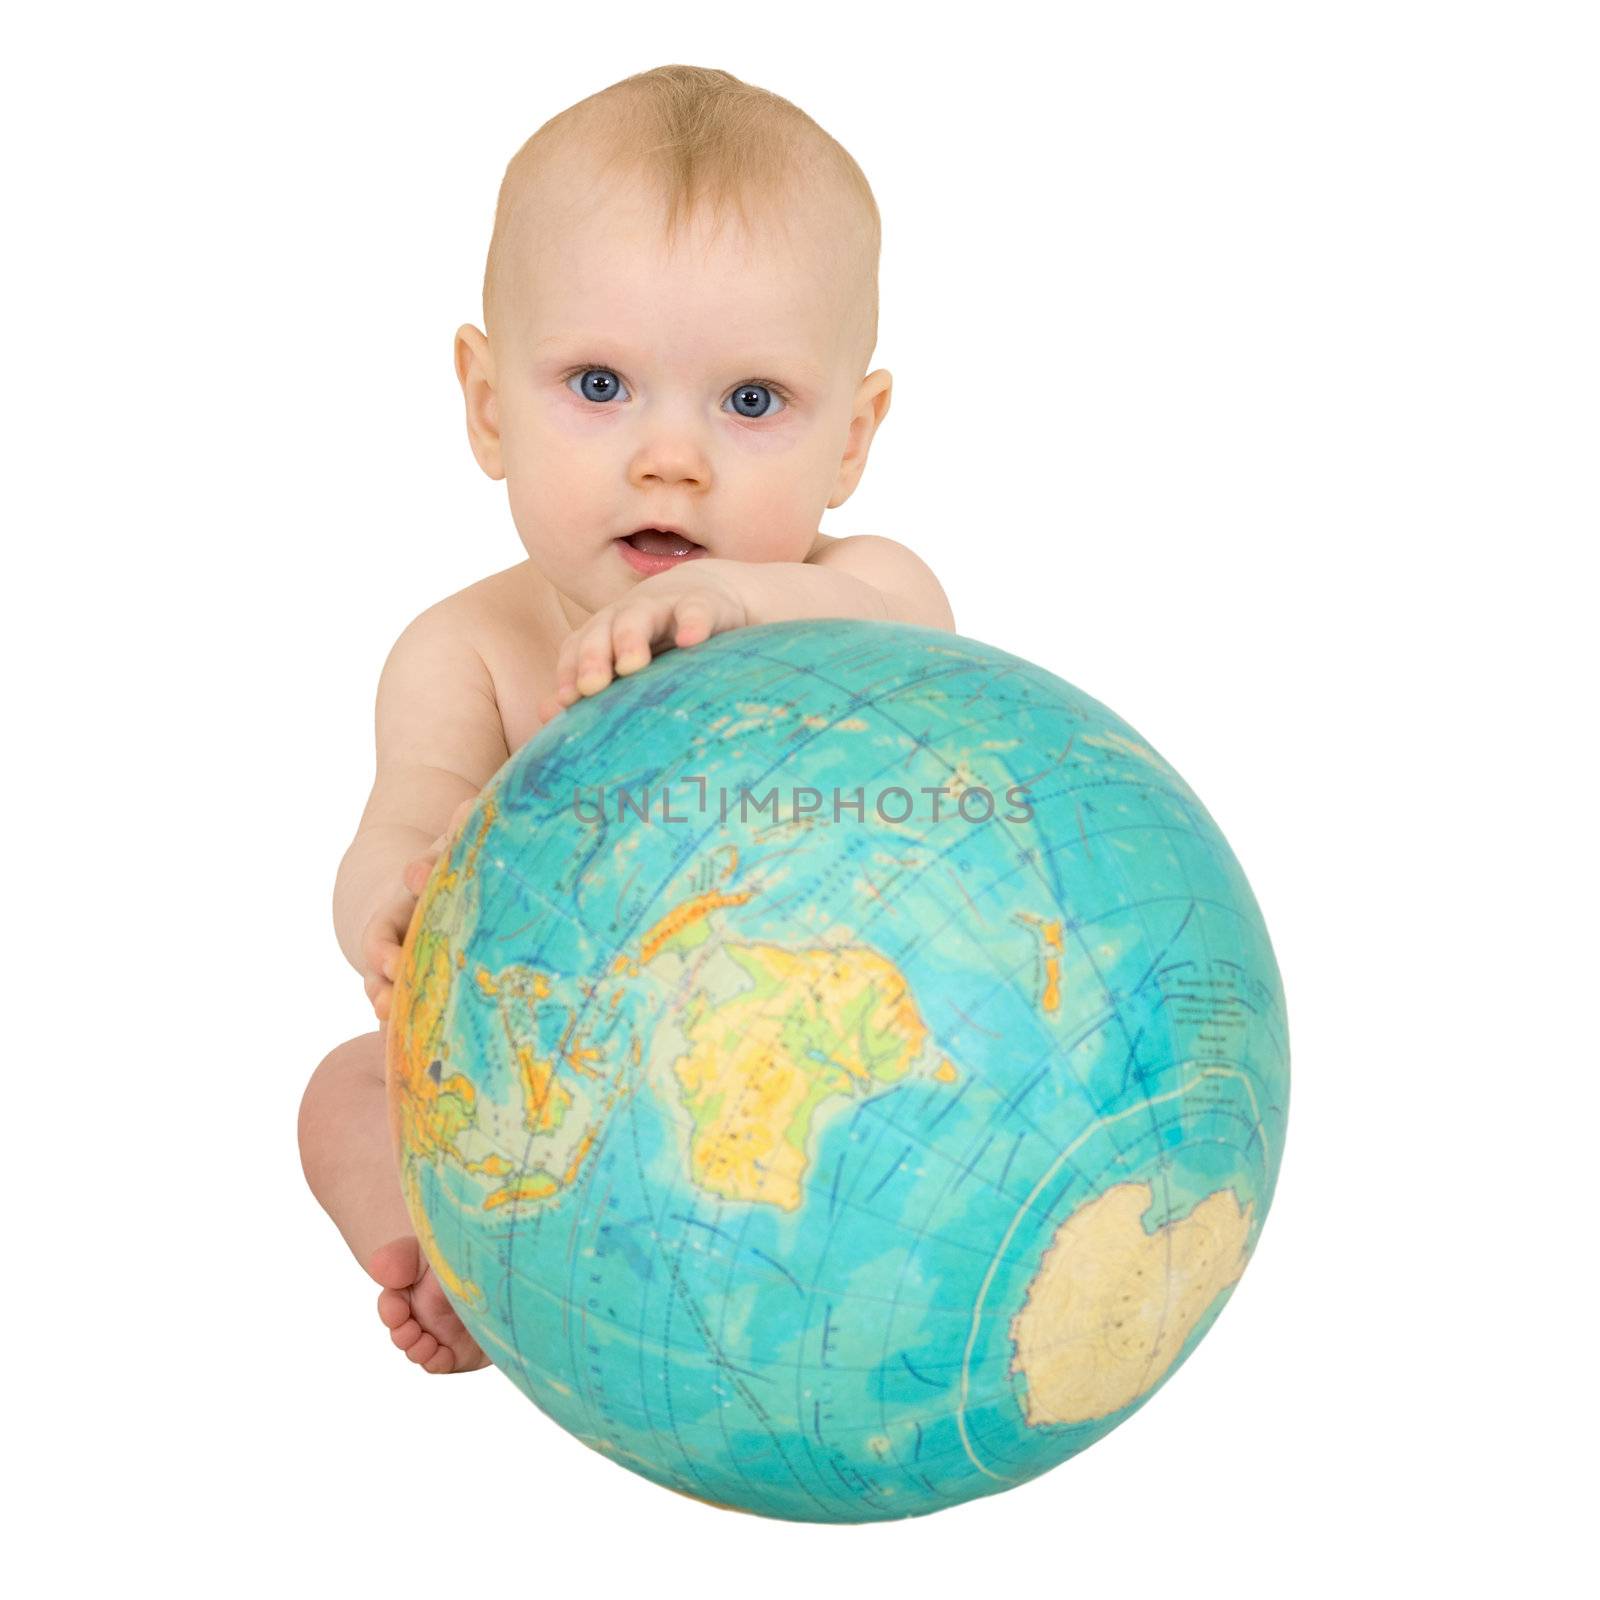 Baby with the geographical globe isolated on a white background